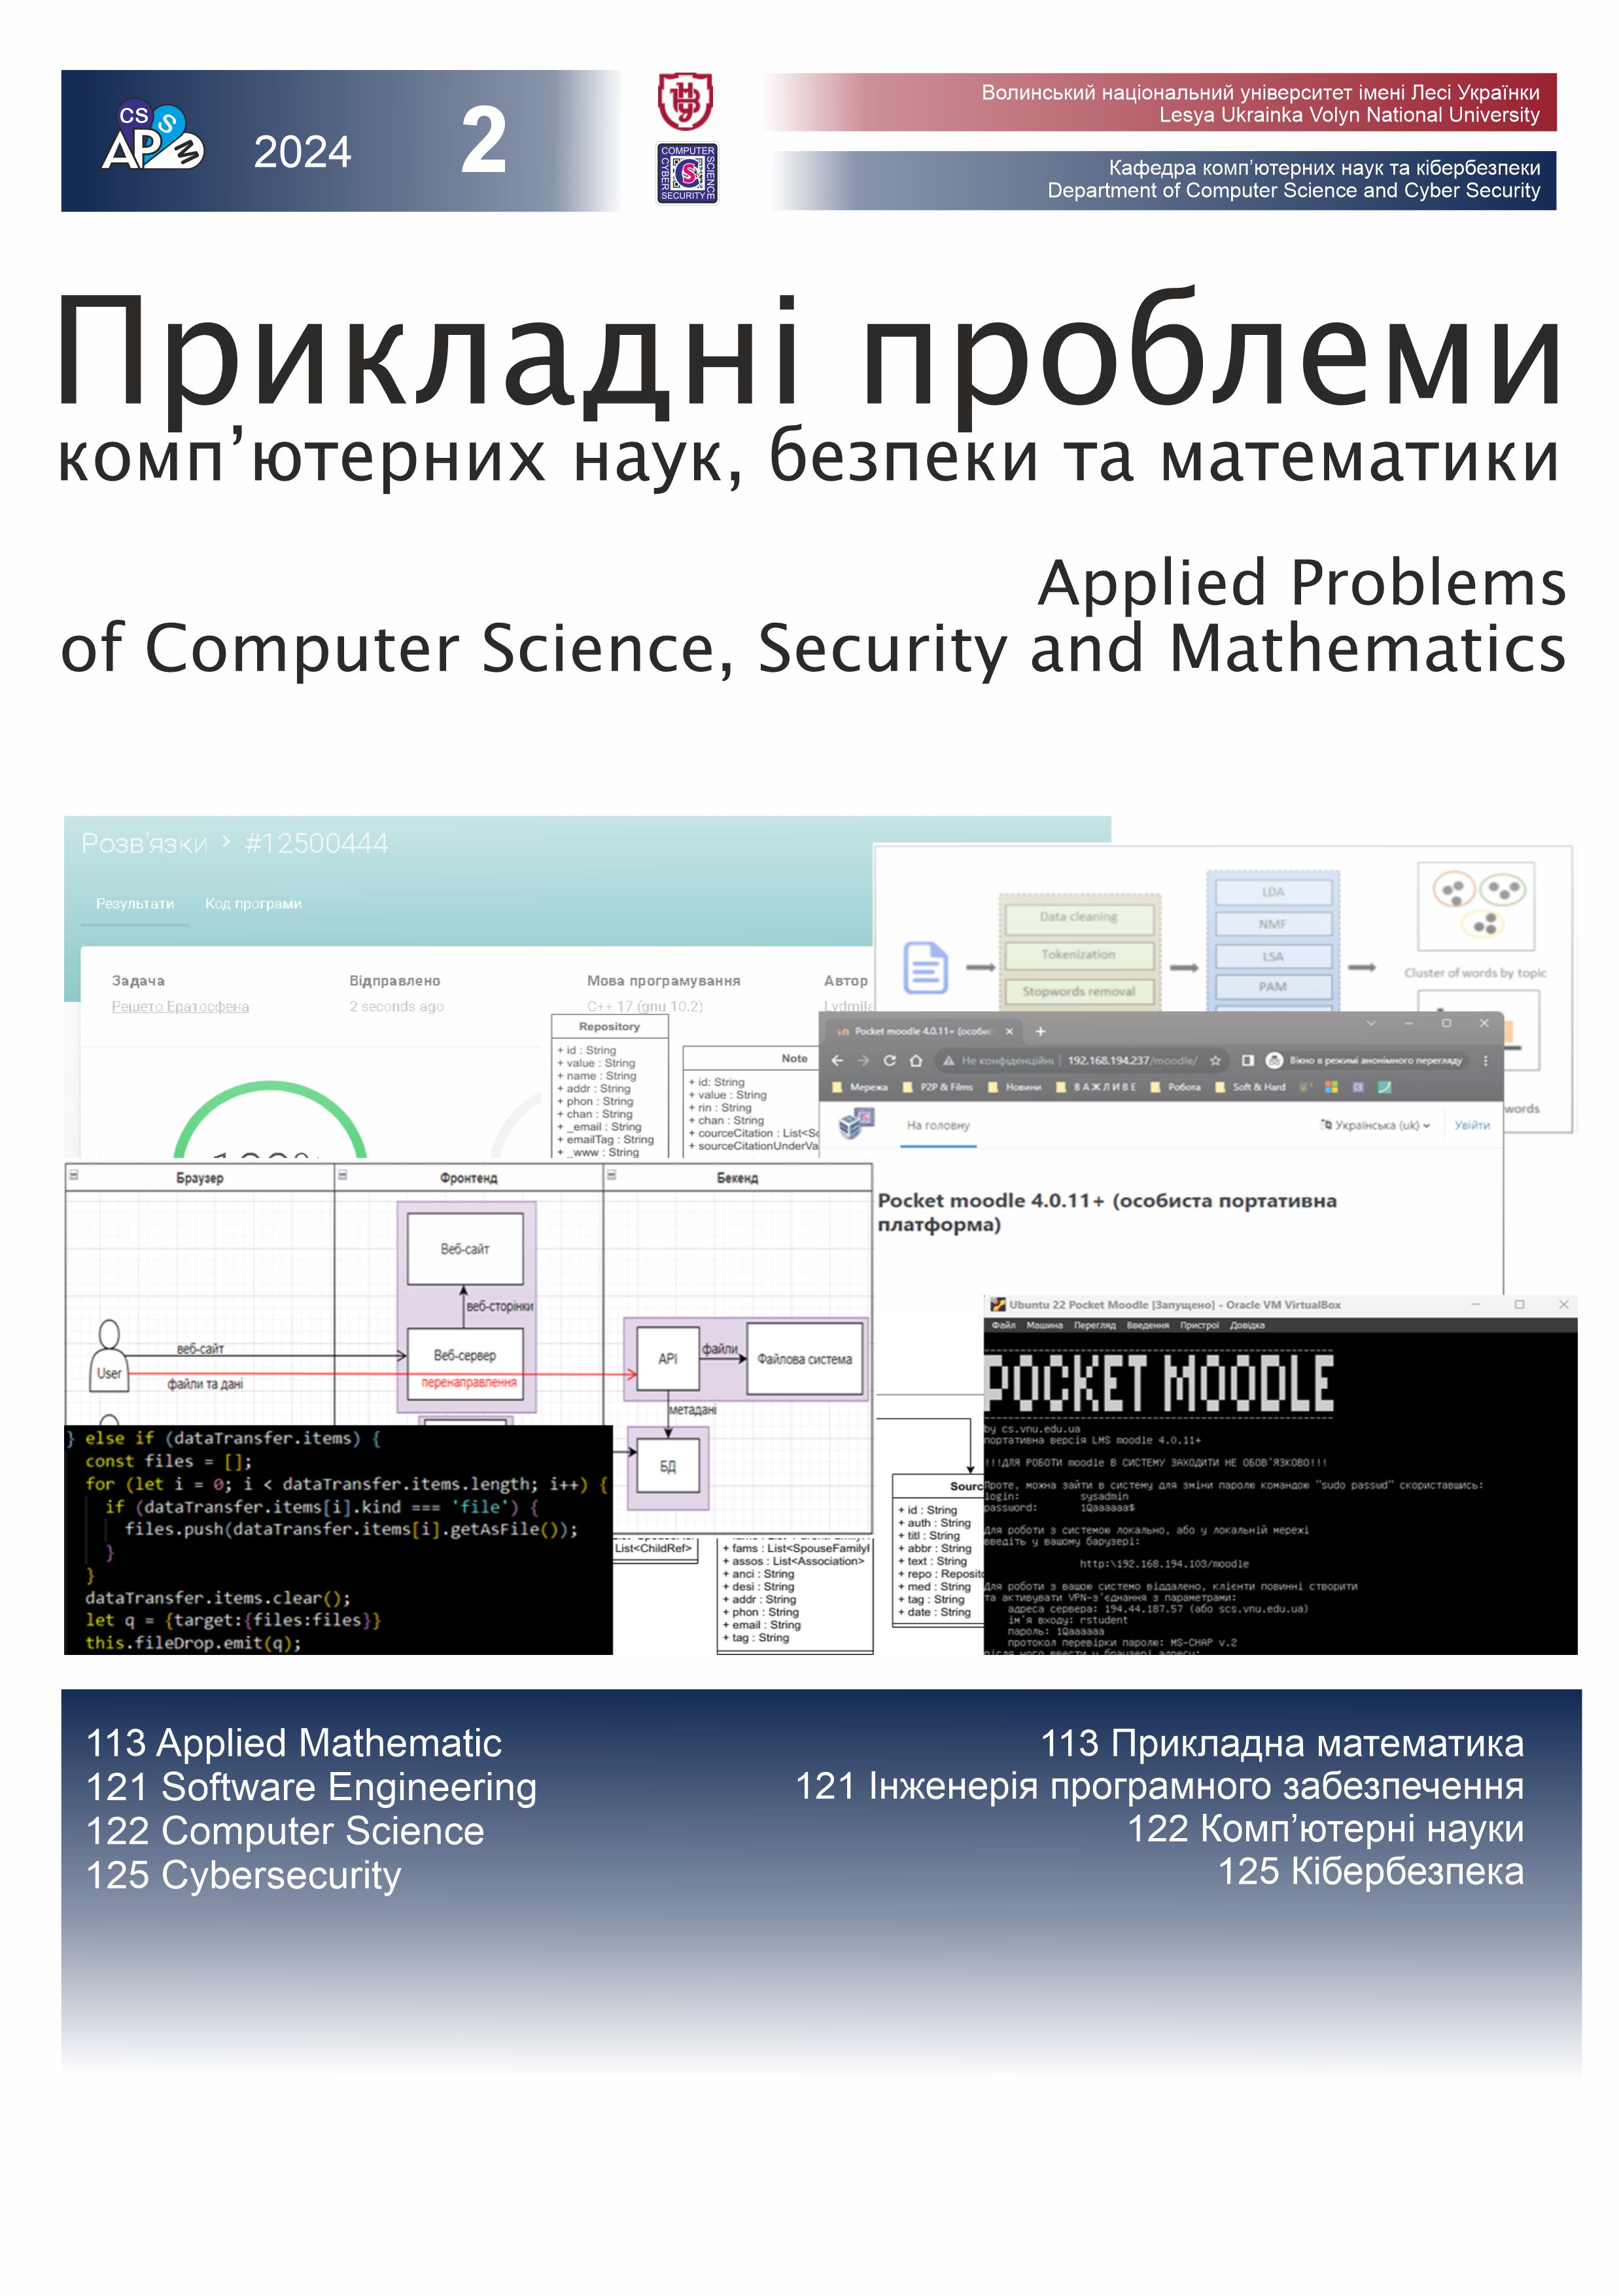 					View No. 2 (2023): Applied Problems of Computer Science, Security and Mathematics
				